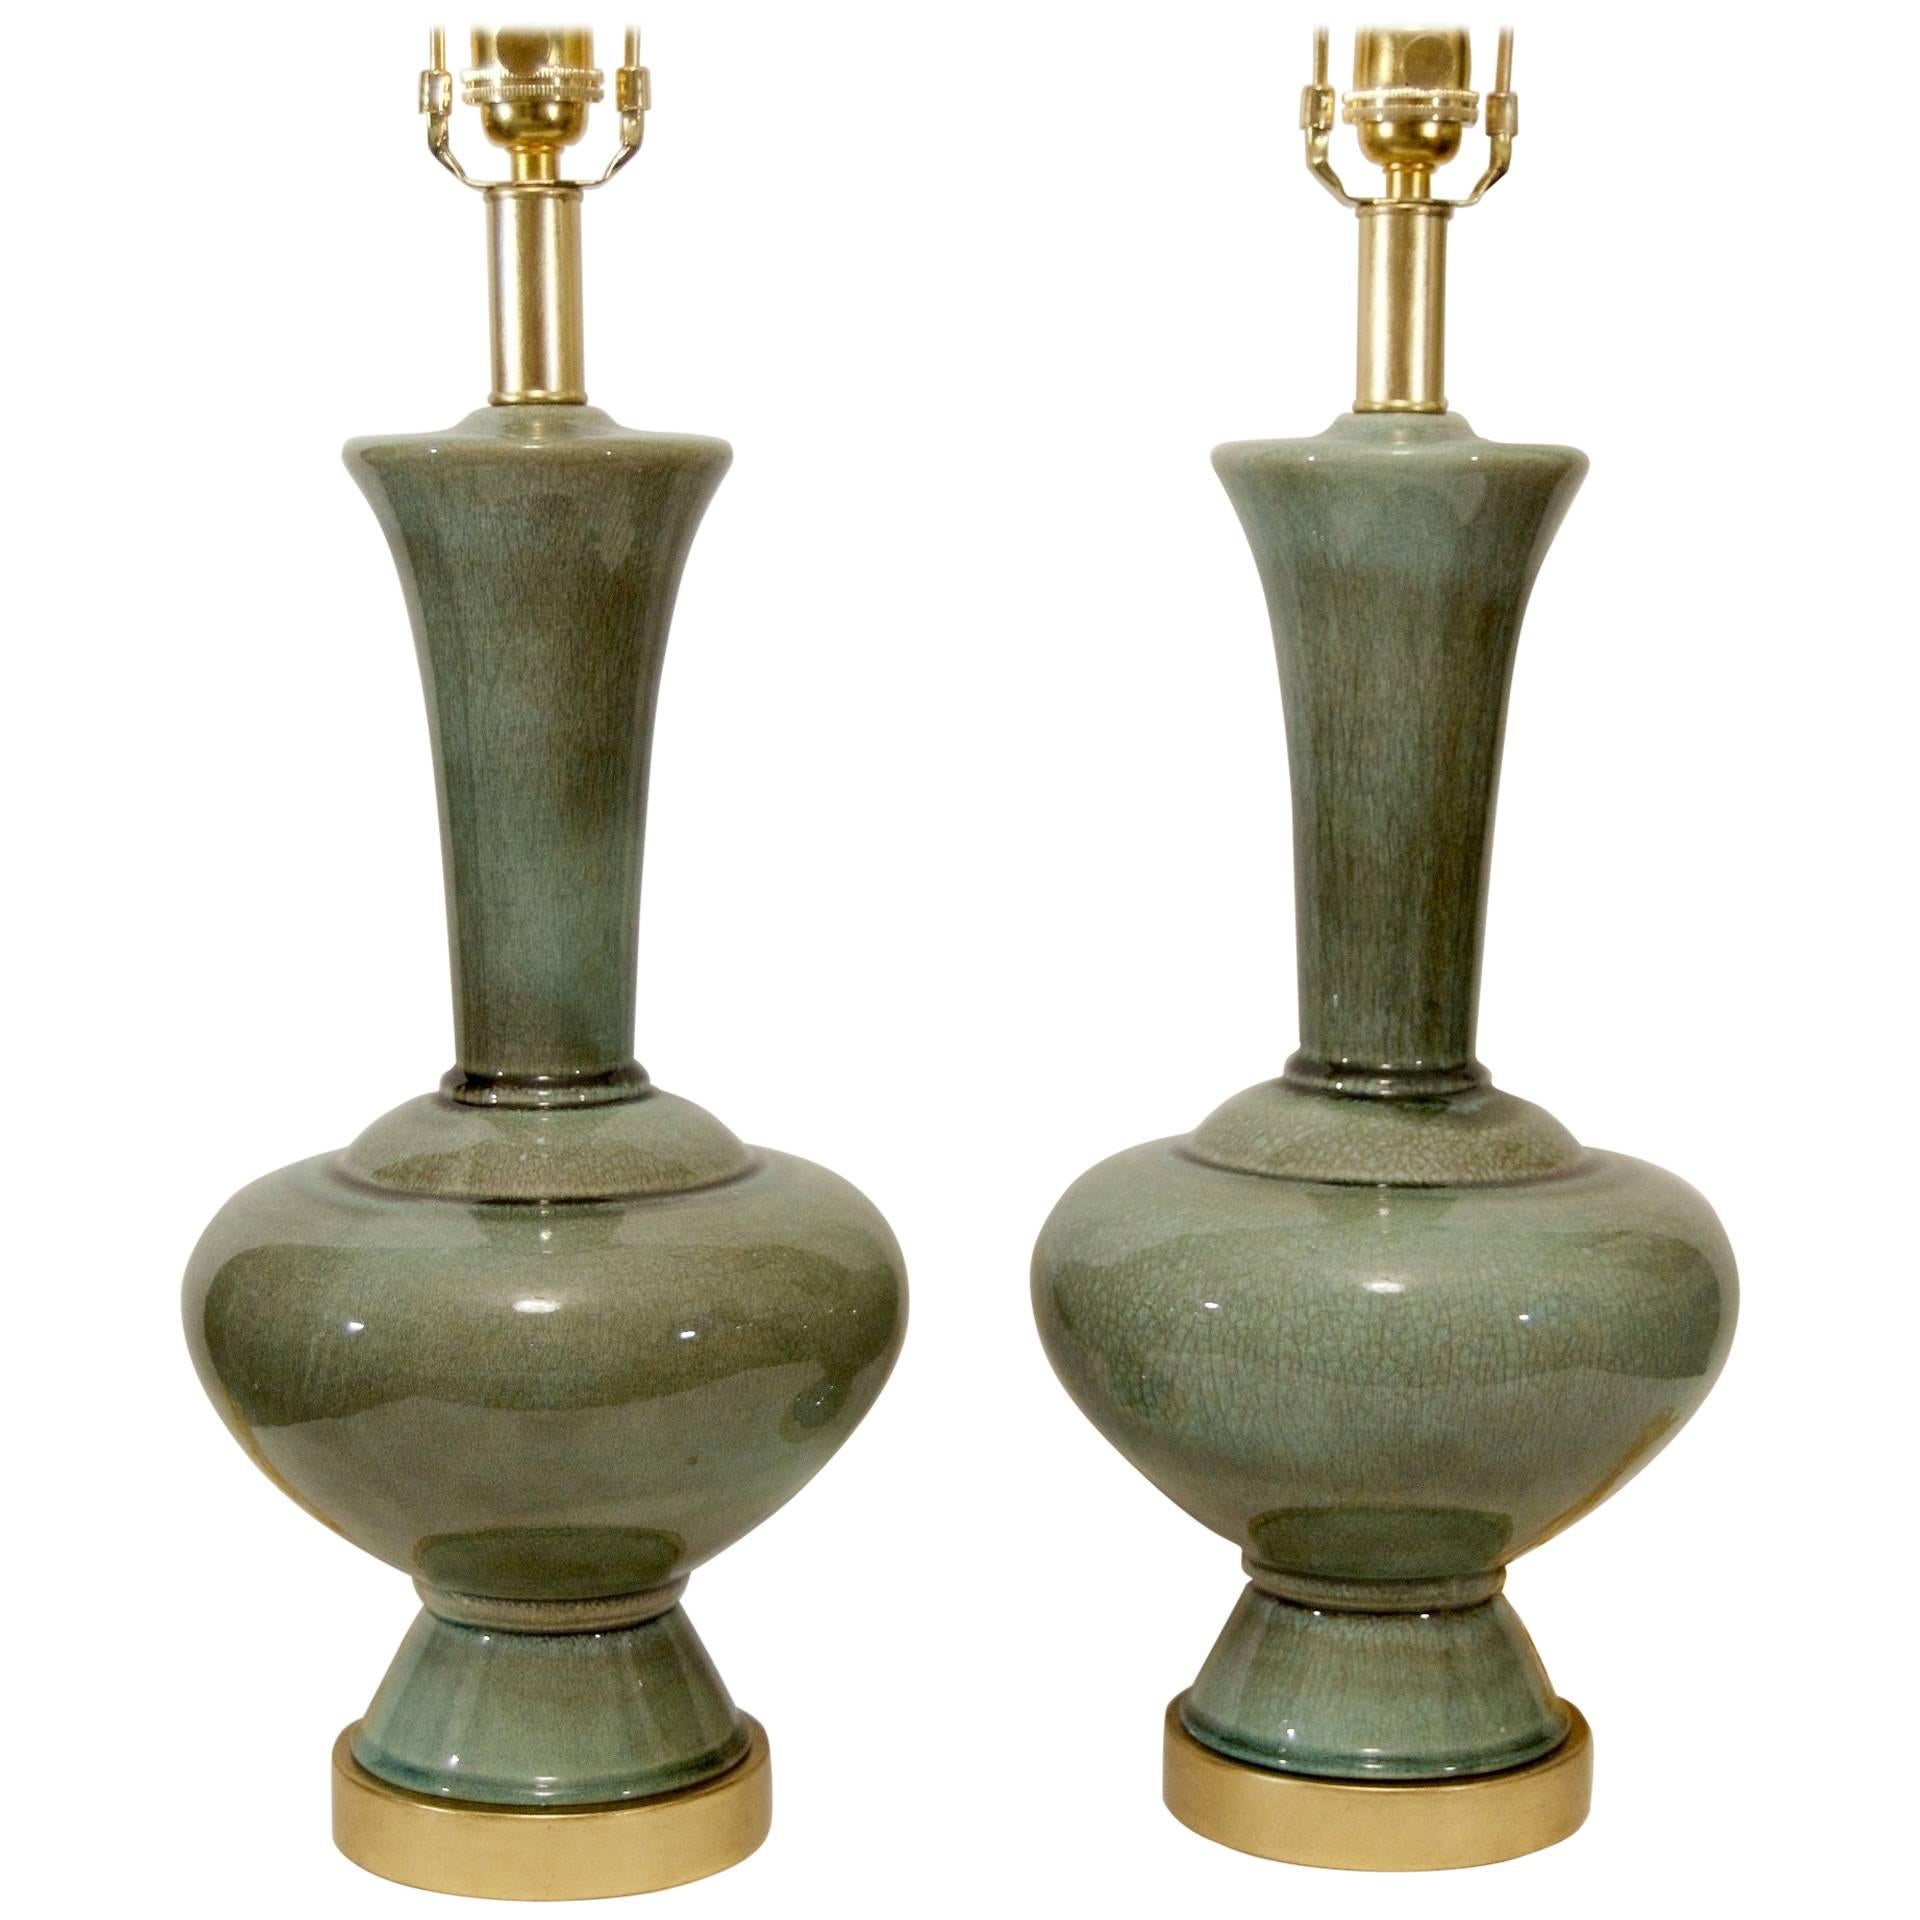 Excellent Pair of Celadon Glazed and Gilt Ceramic Lamps